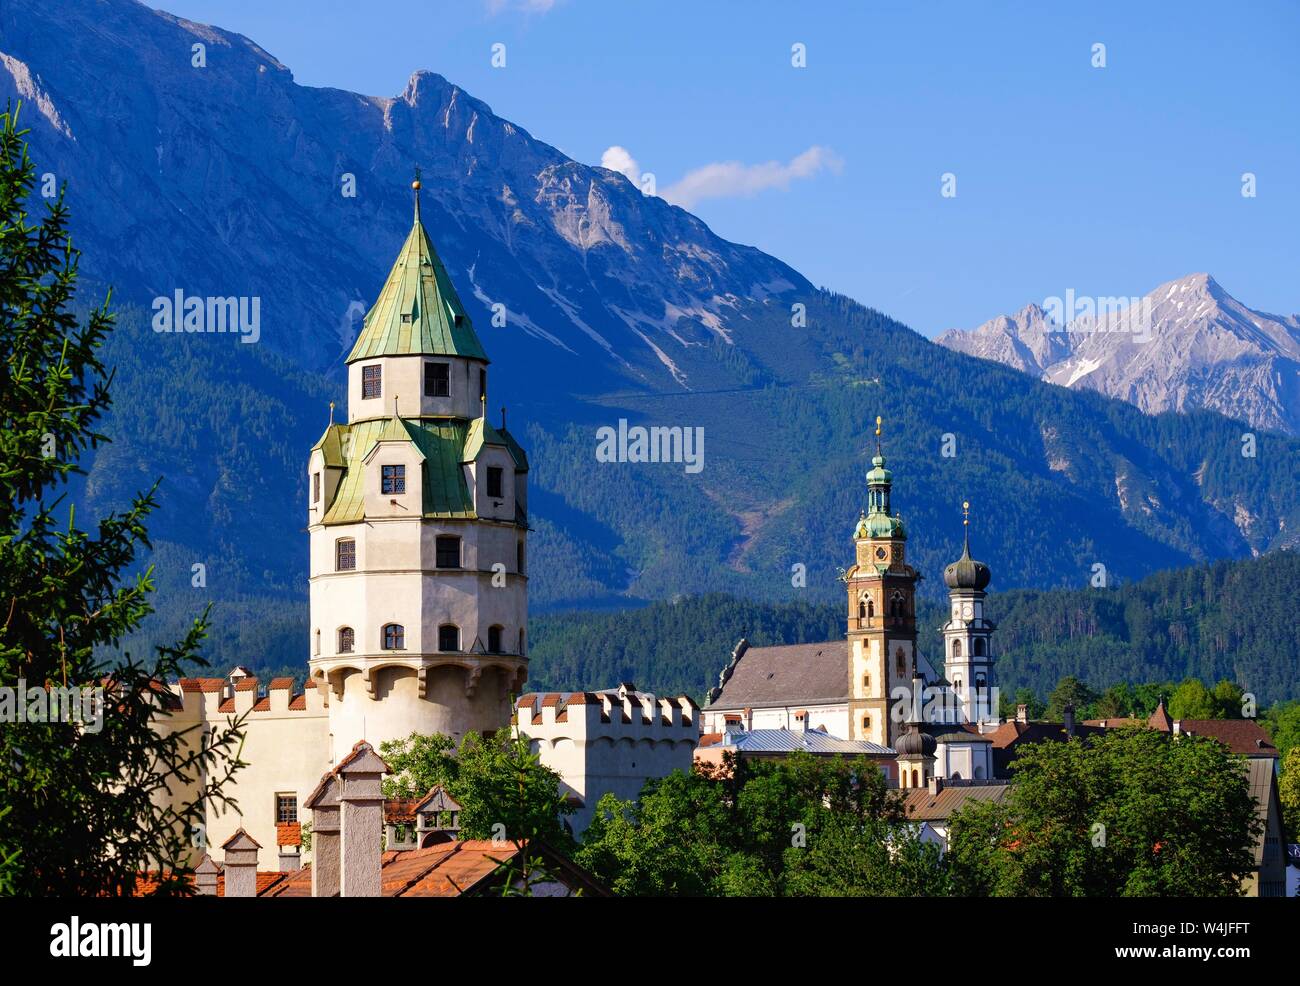 Hasegg Castle with Mint Tower, Sacred Heart Basilica and Jesuit Church, Hall in Tyrol, Inn Valley, Tyrol, Austria Stock Photo